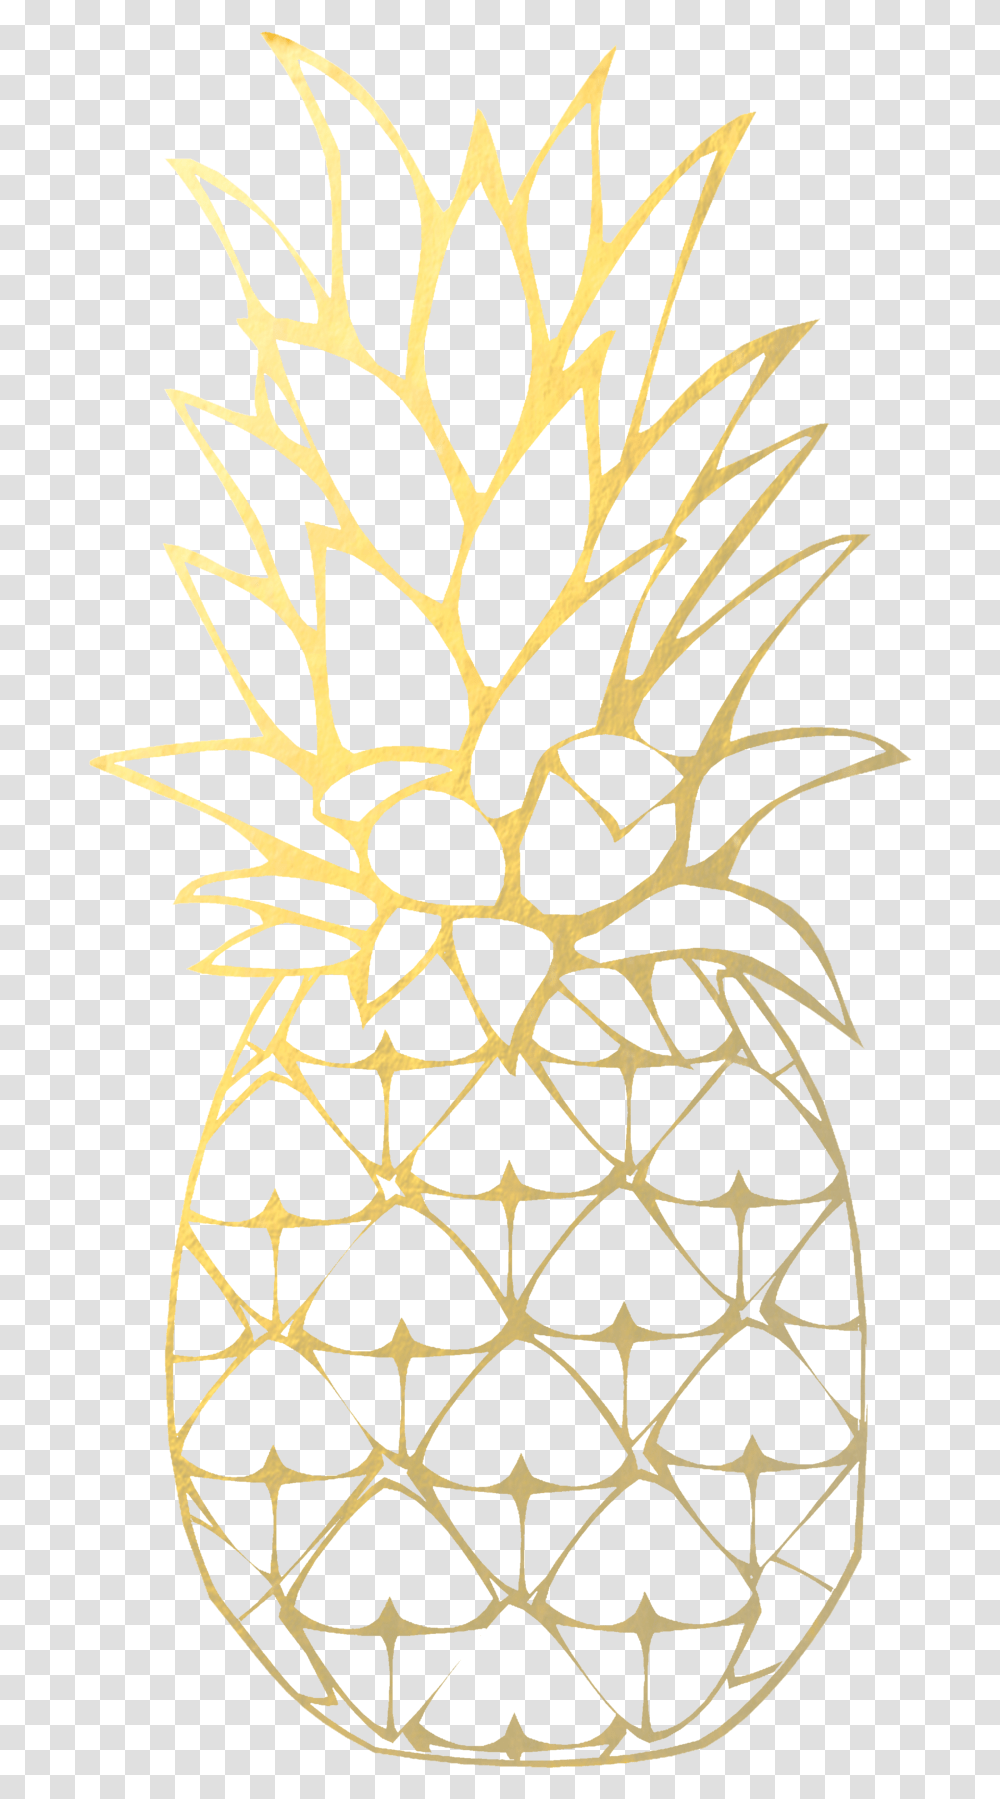 Download Gold Pineapple Image Gold Pineapple, Stencil, Fruit, Plant, Food Transparent Png